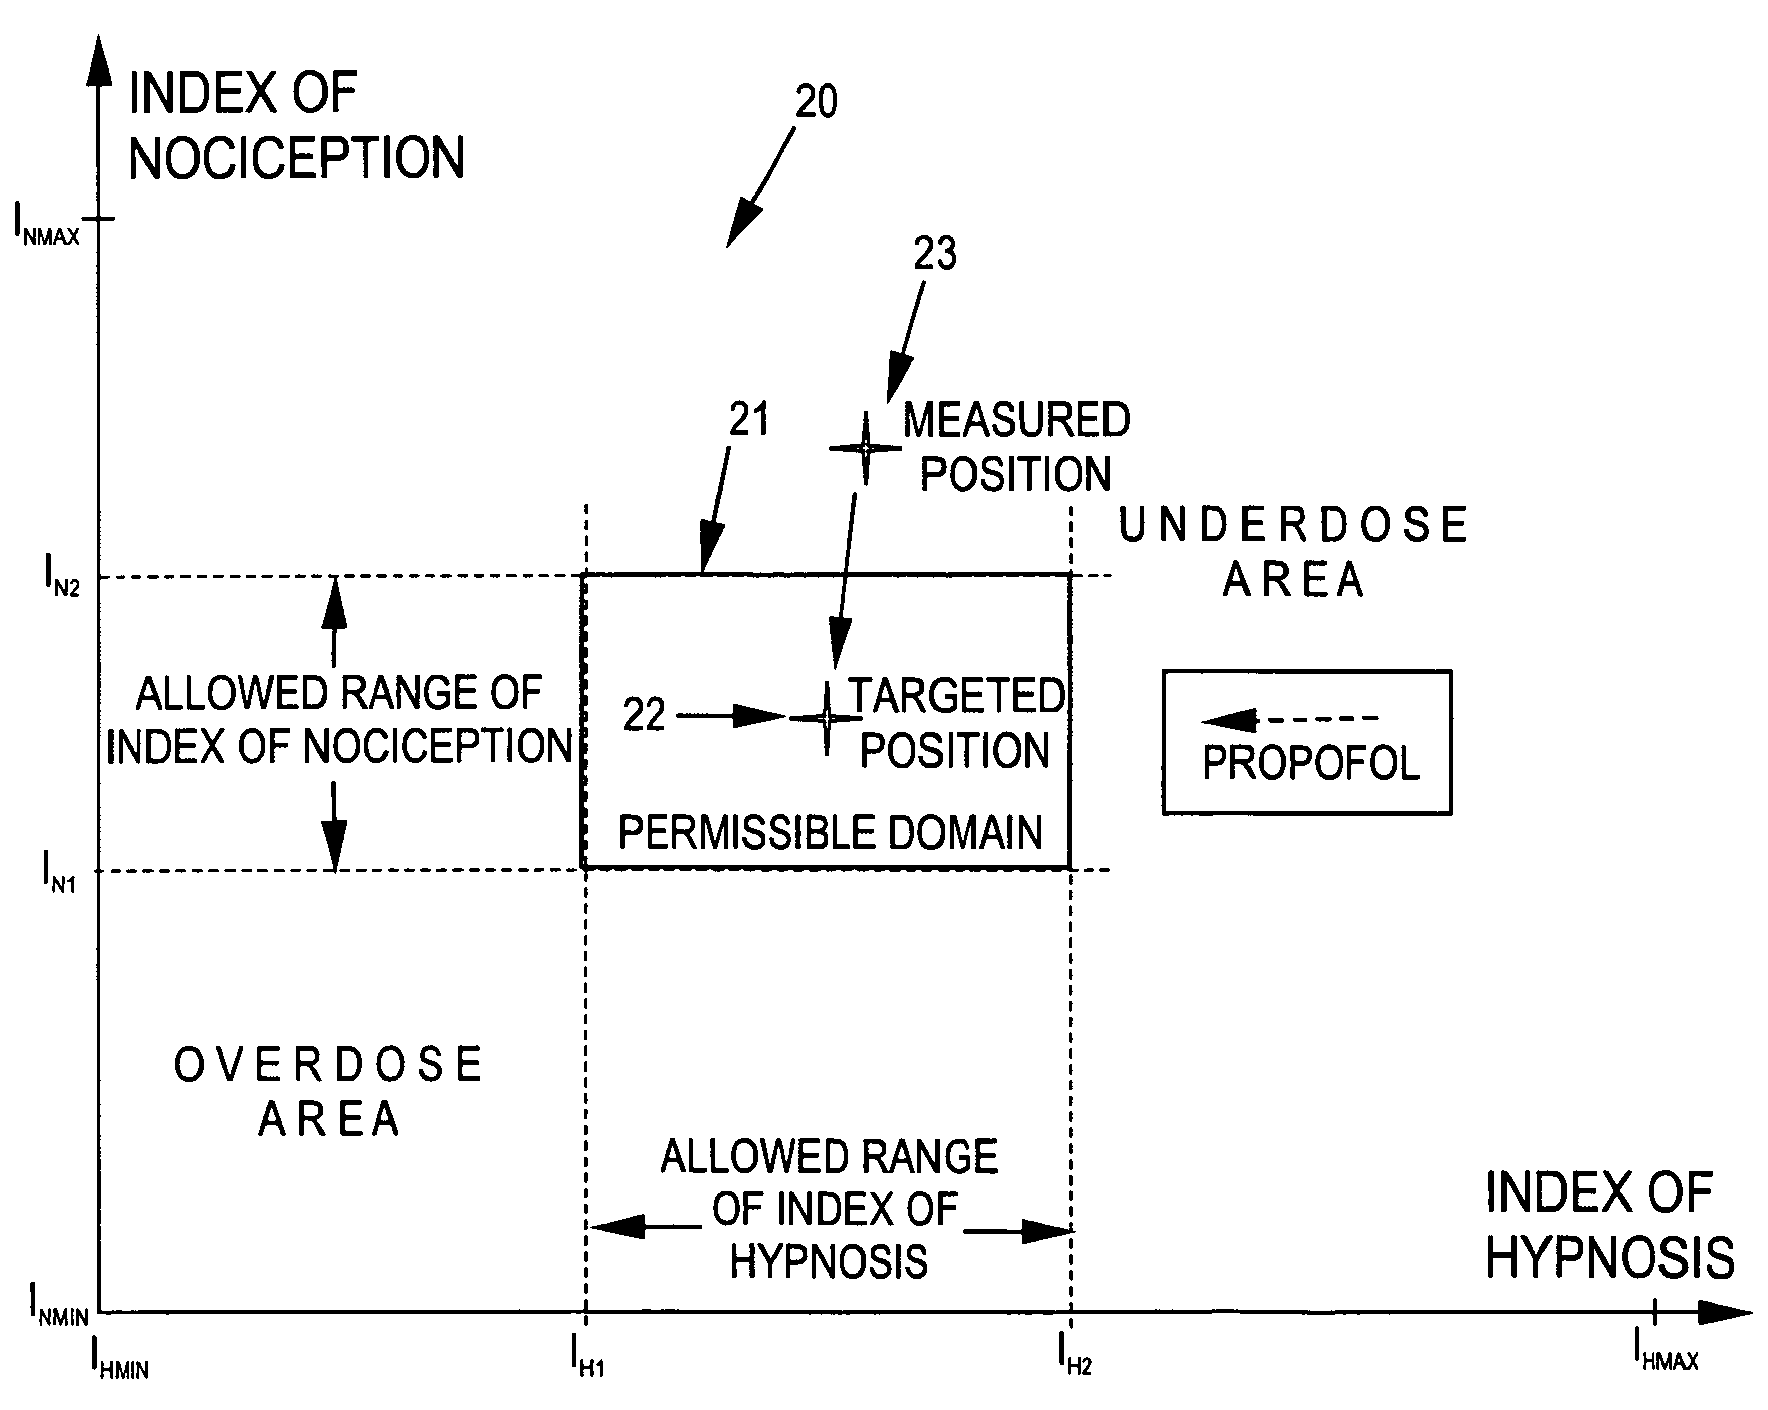 Determination of the anesthetic state of a patient